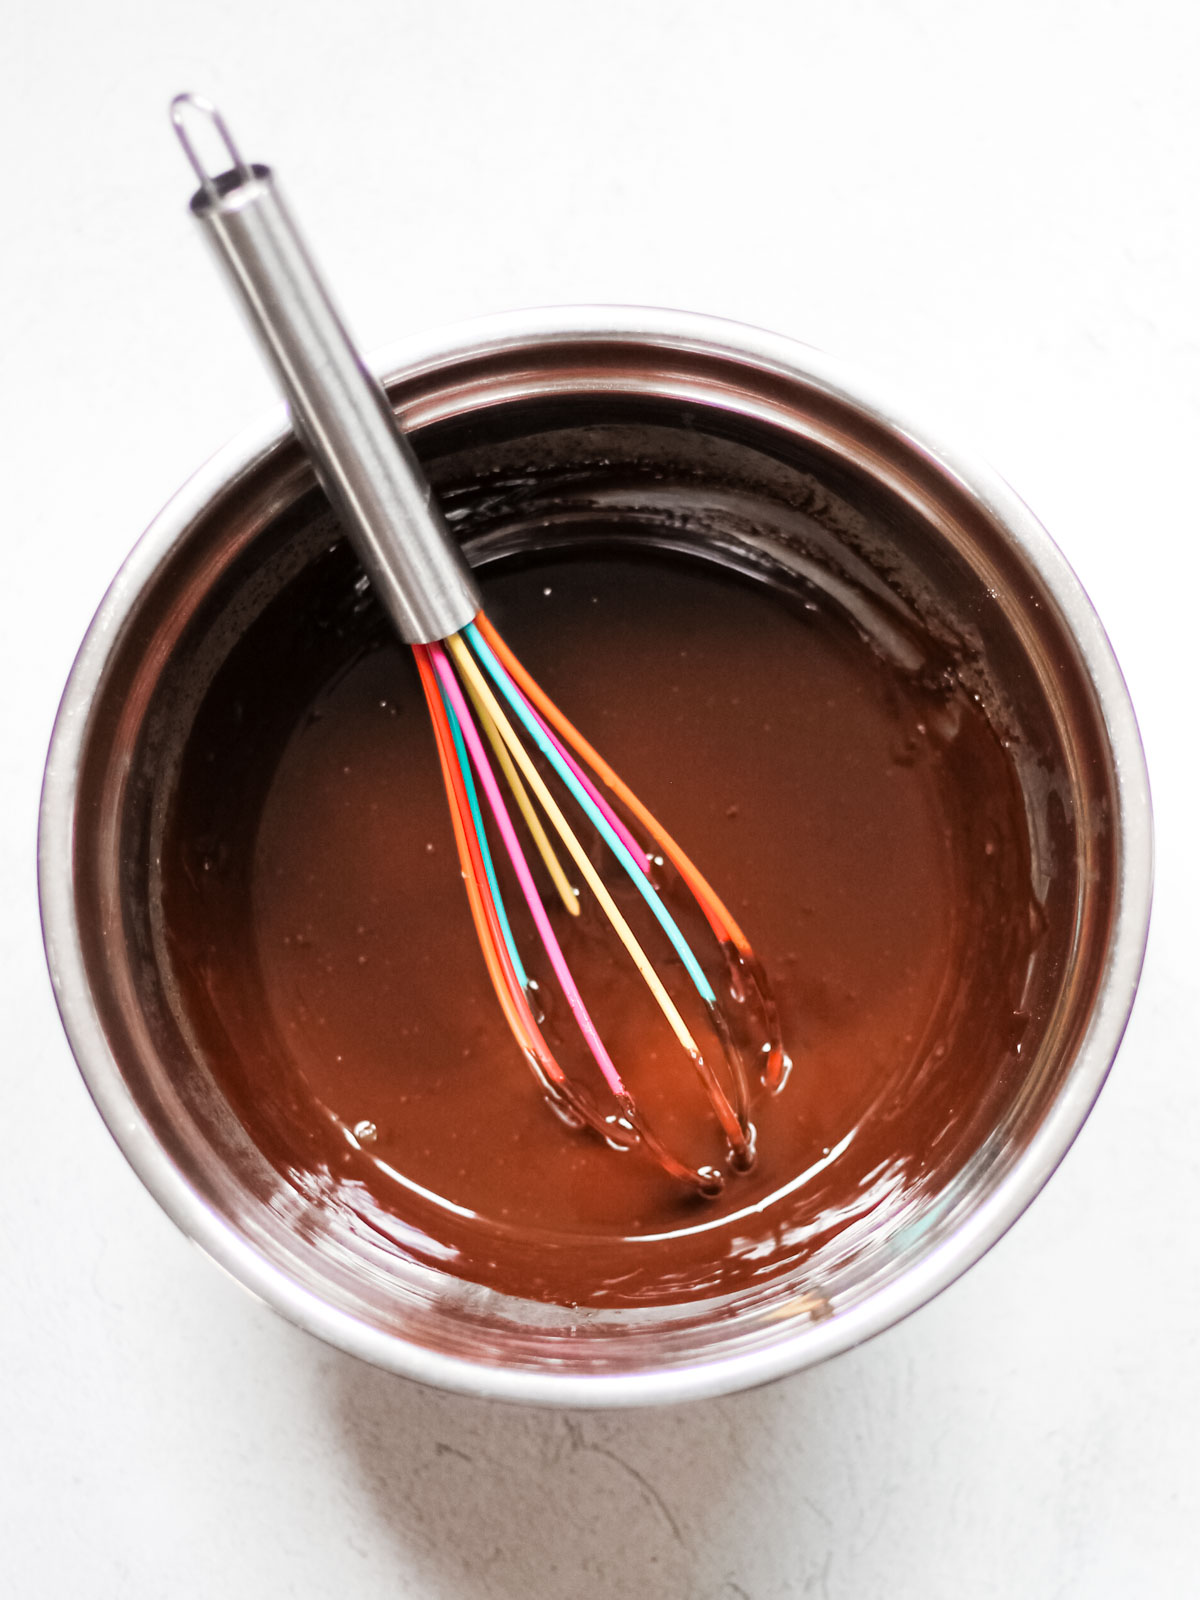 Whisk in a metal bowl full of melted chocolate and heavy whipping cream.